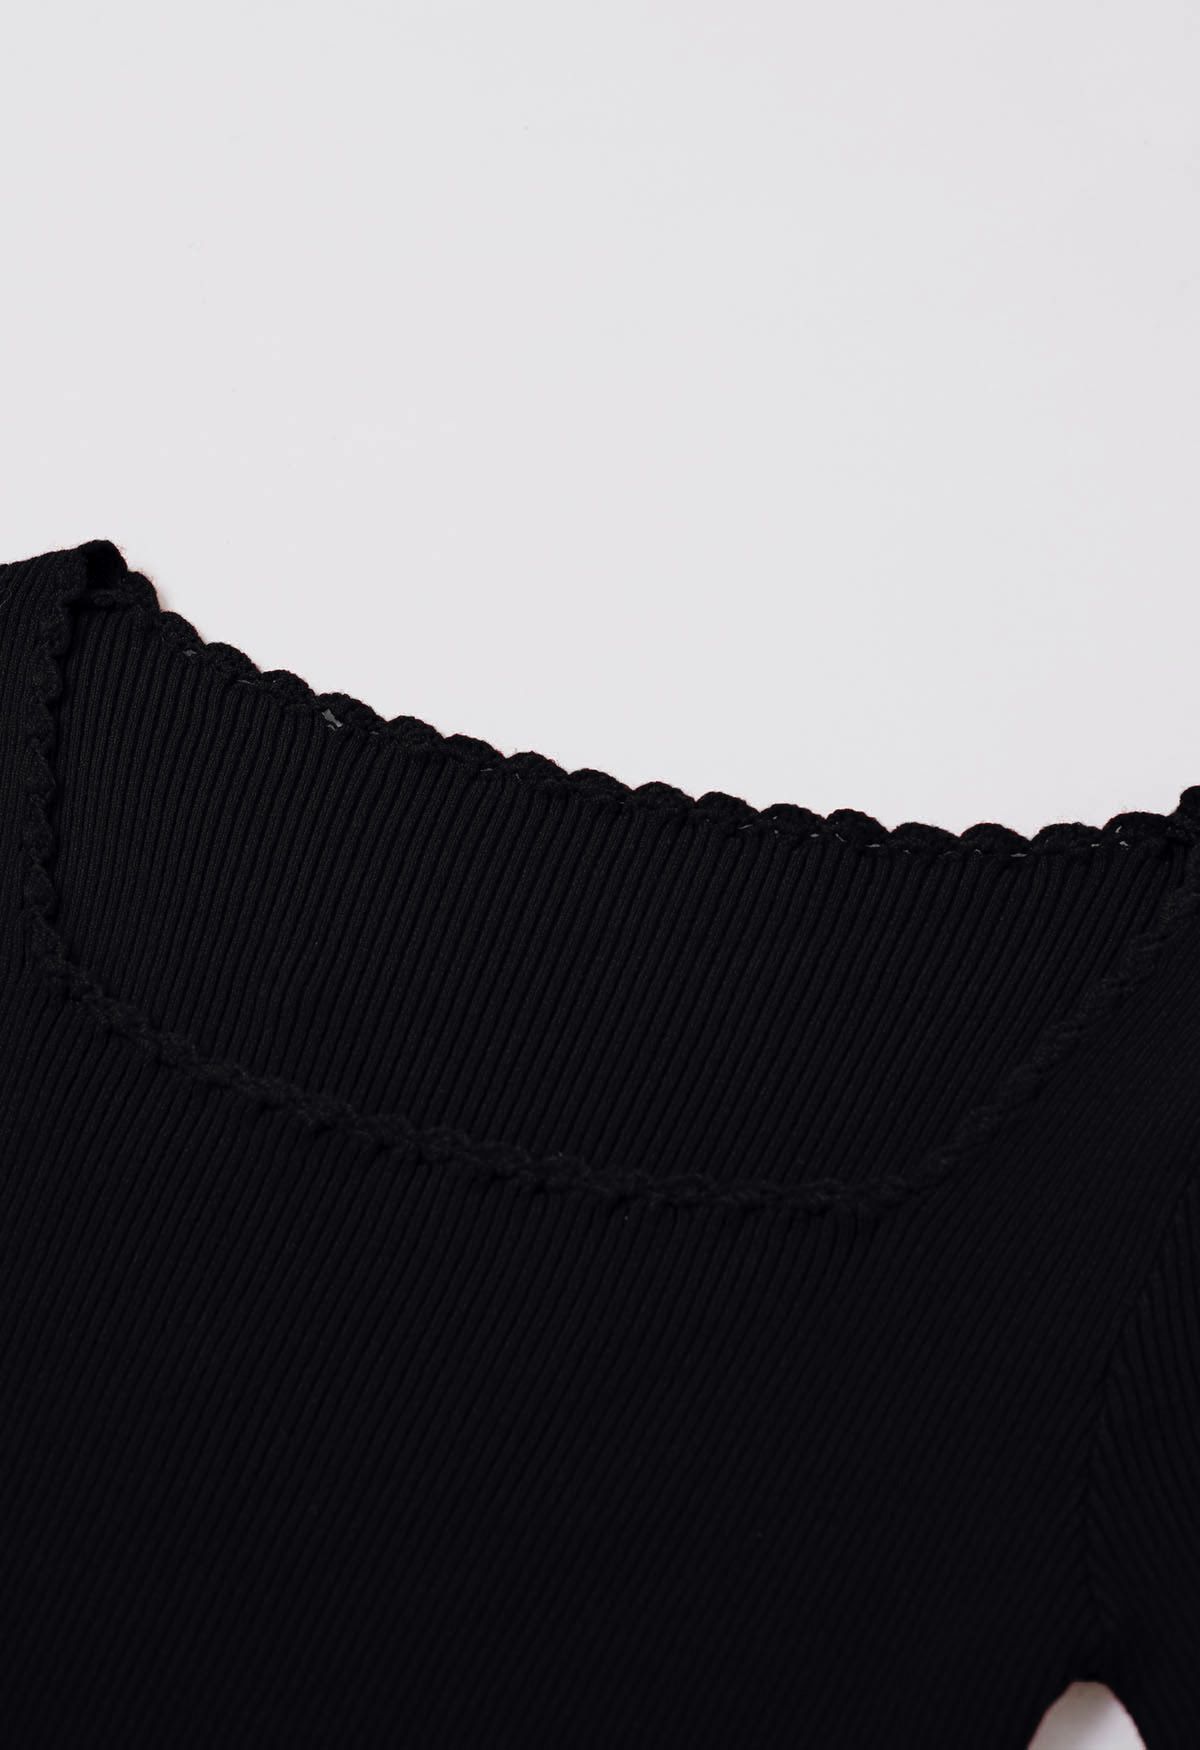 Scalloped Edge Square Neck Short Sleeve Knit Top in Black